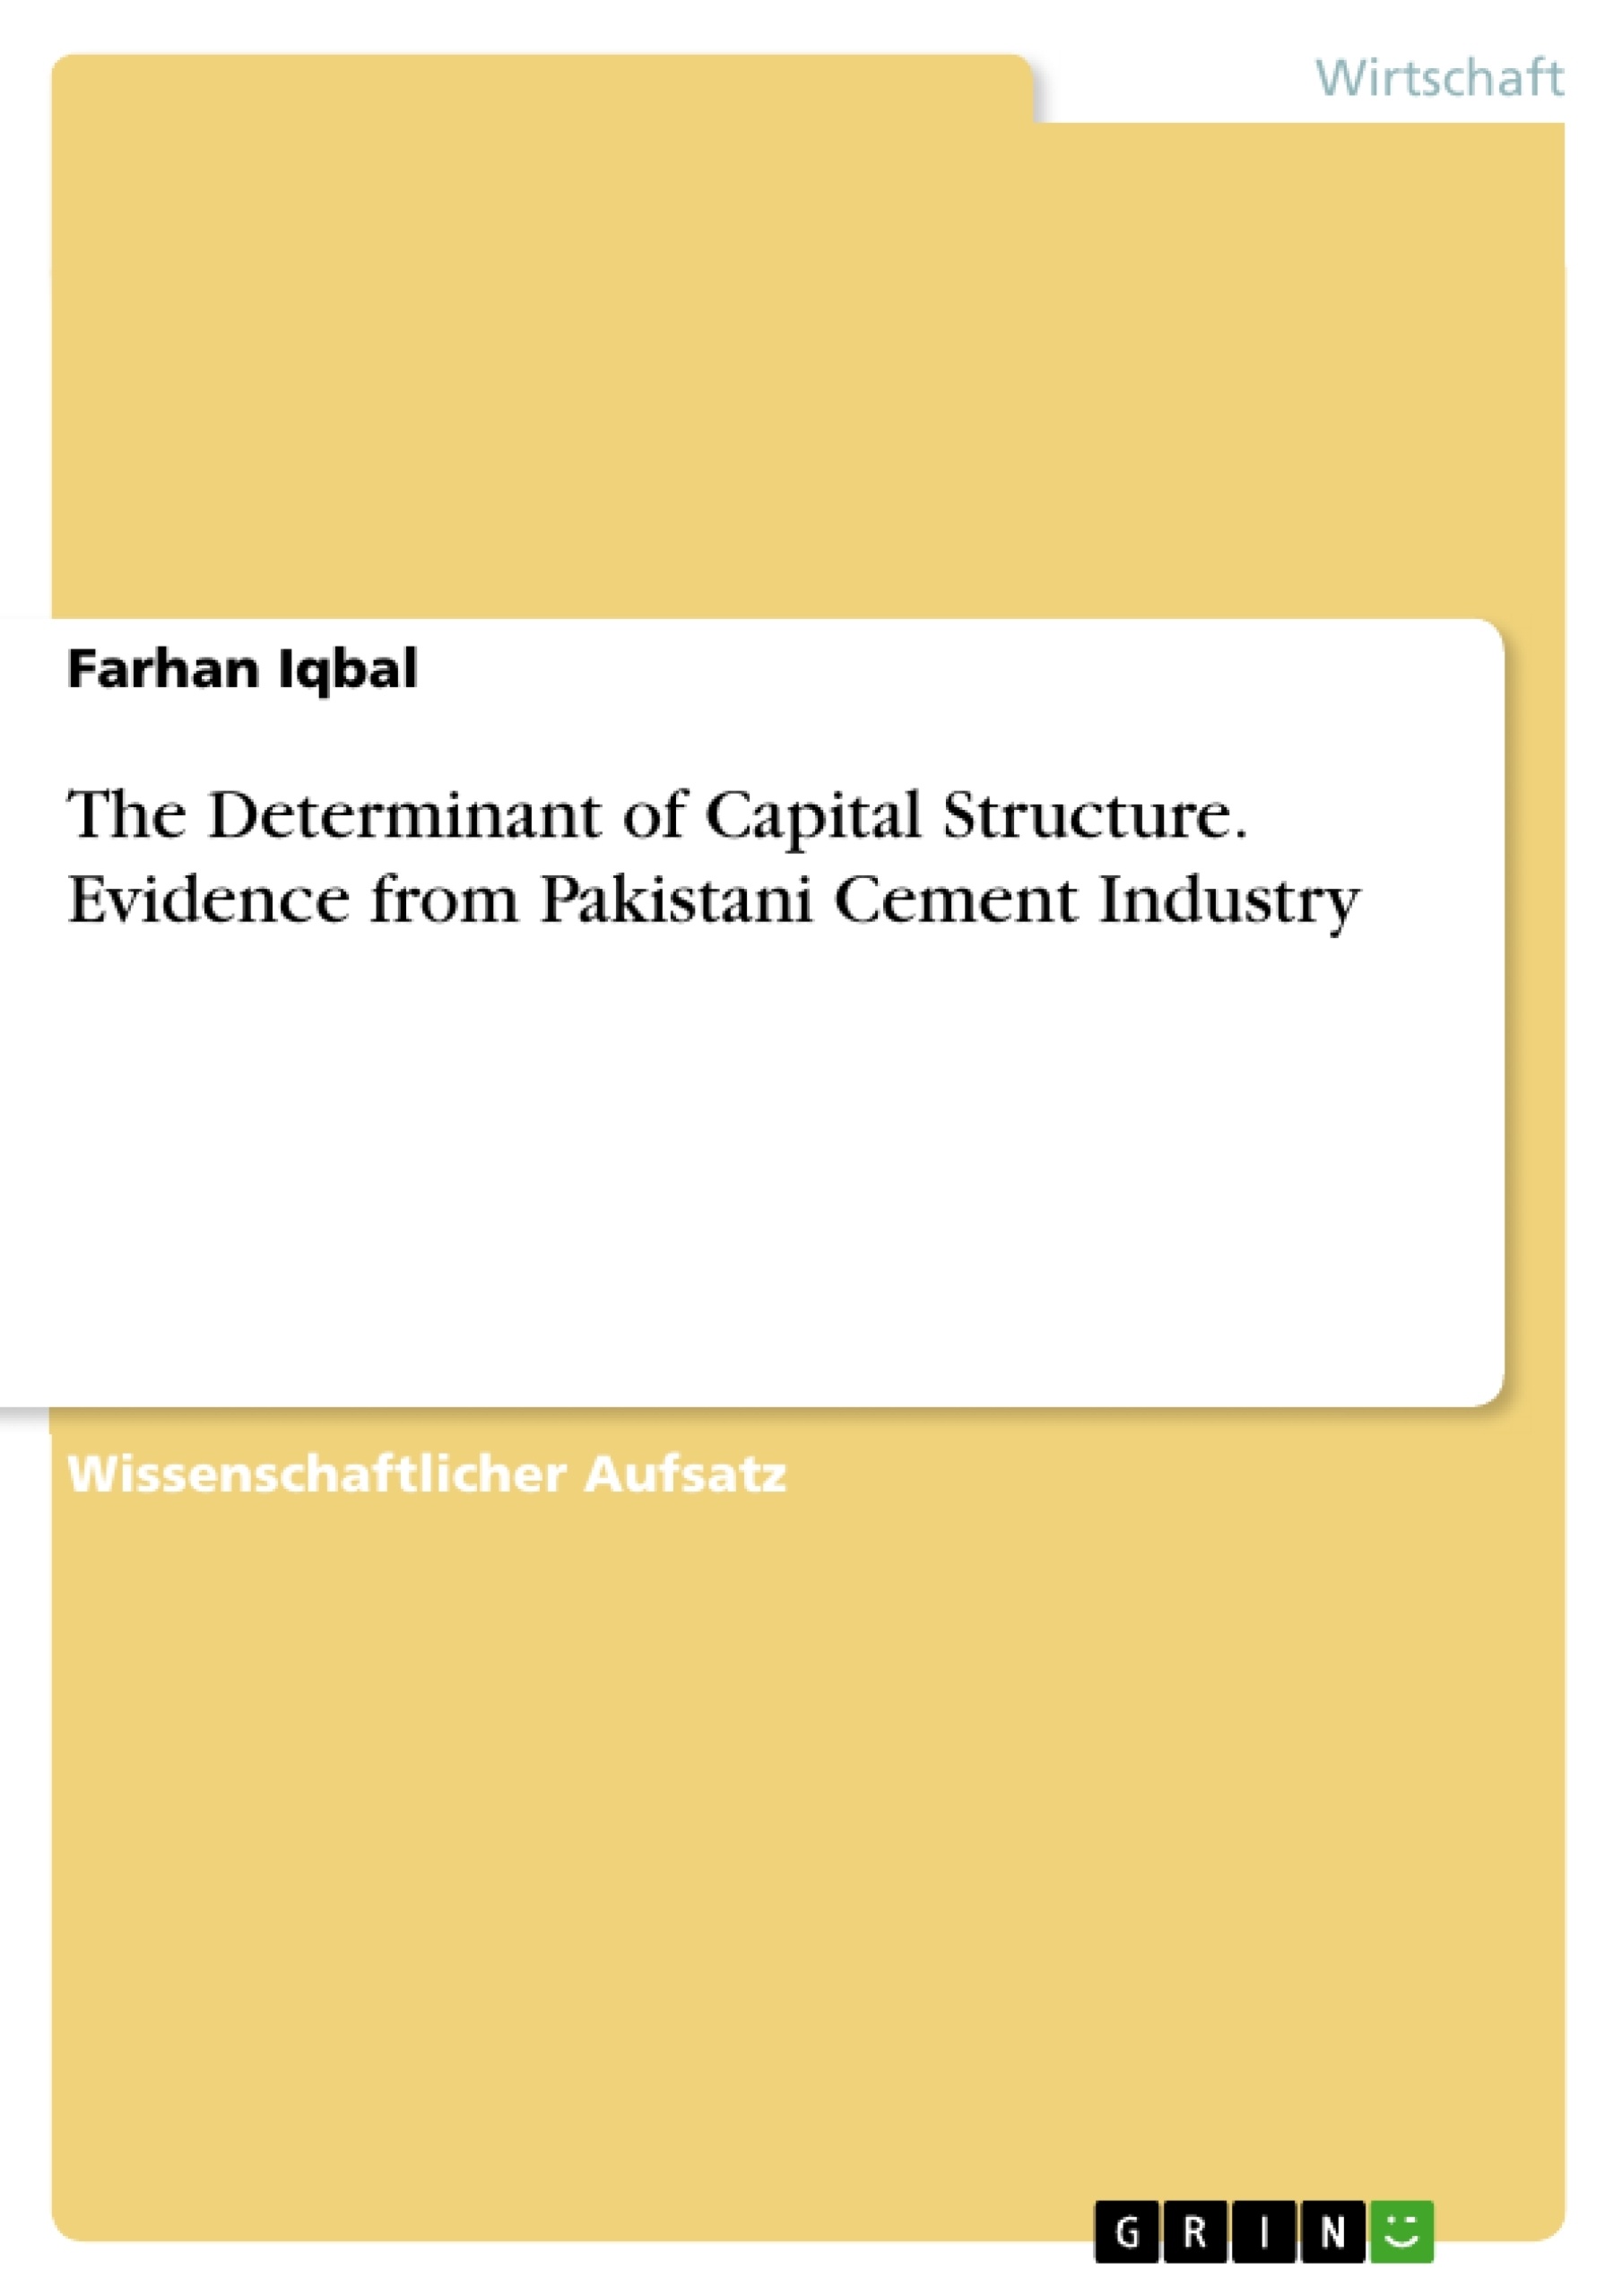 Titel: The Determinant of Capital Structure. Evidence from Pakistani Cement Industry